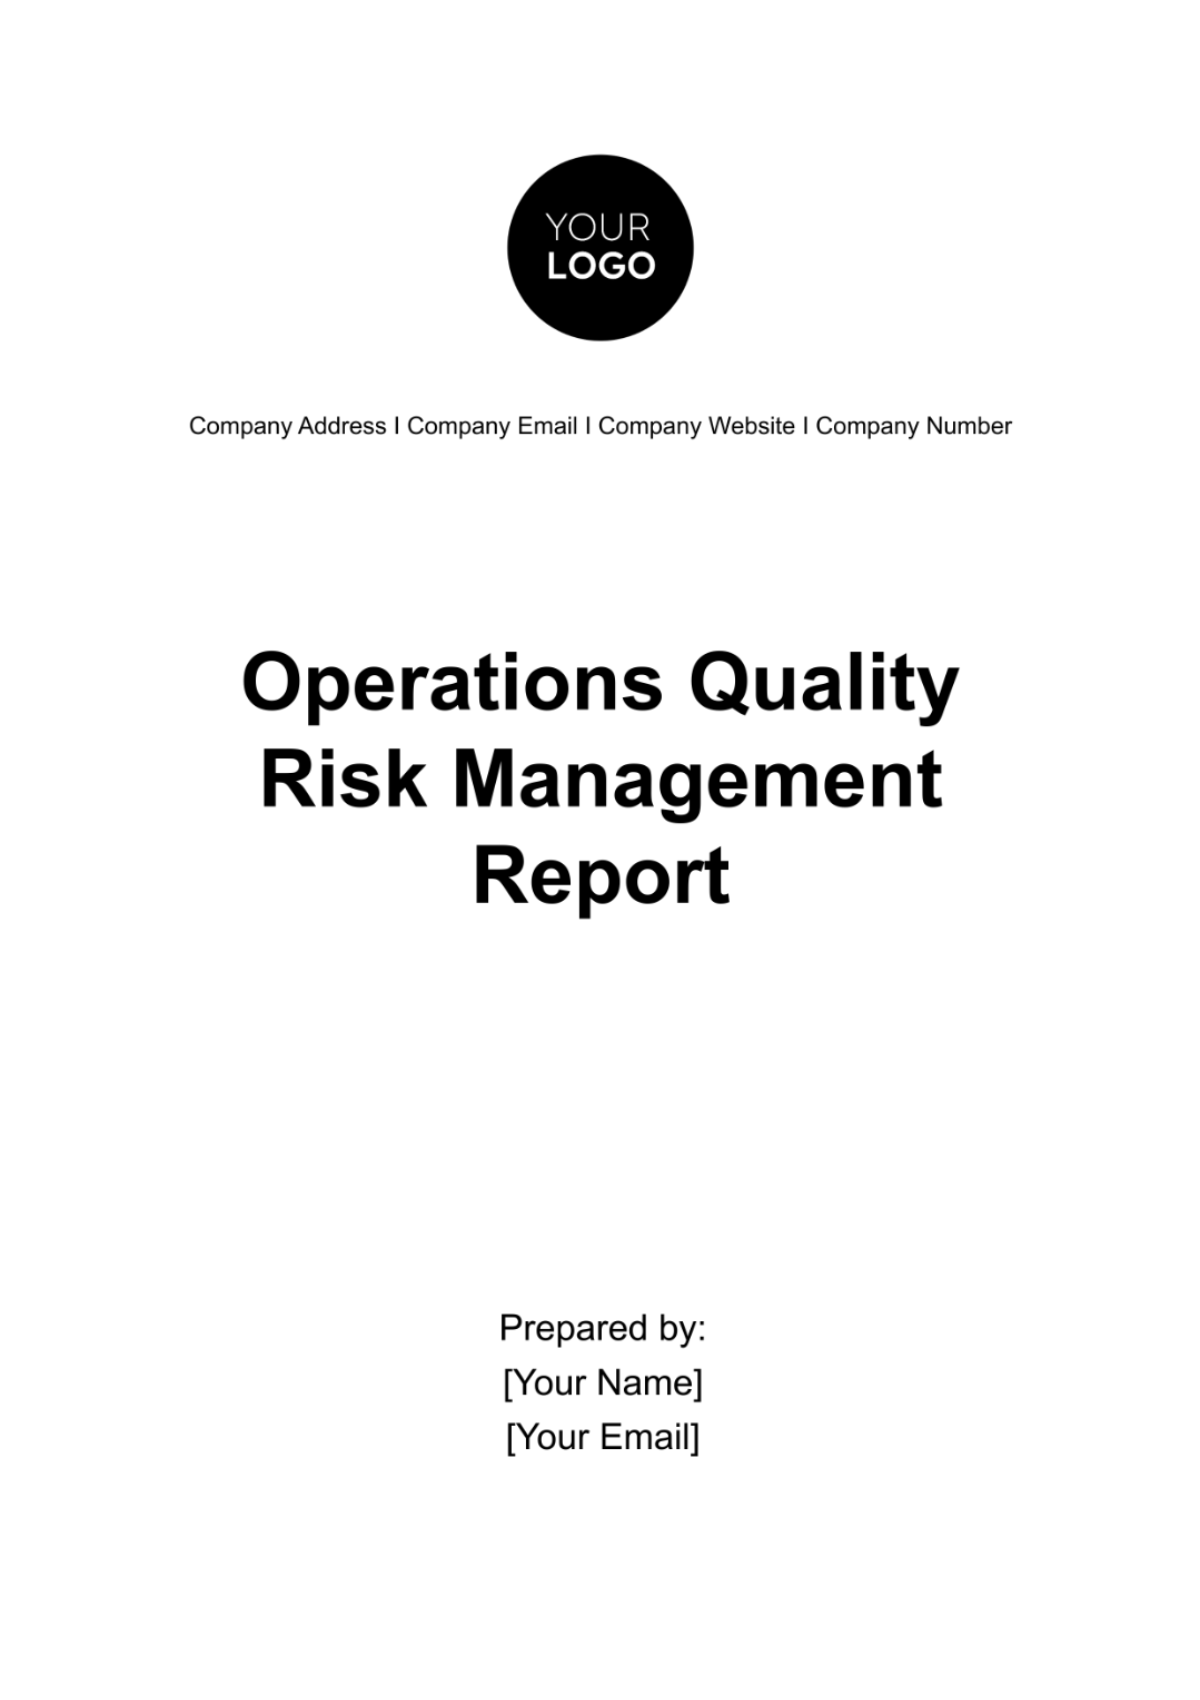 Operations Quality Risk Management Report Template